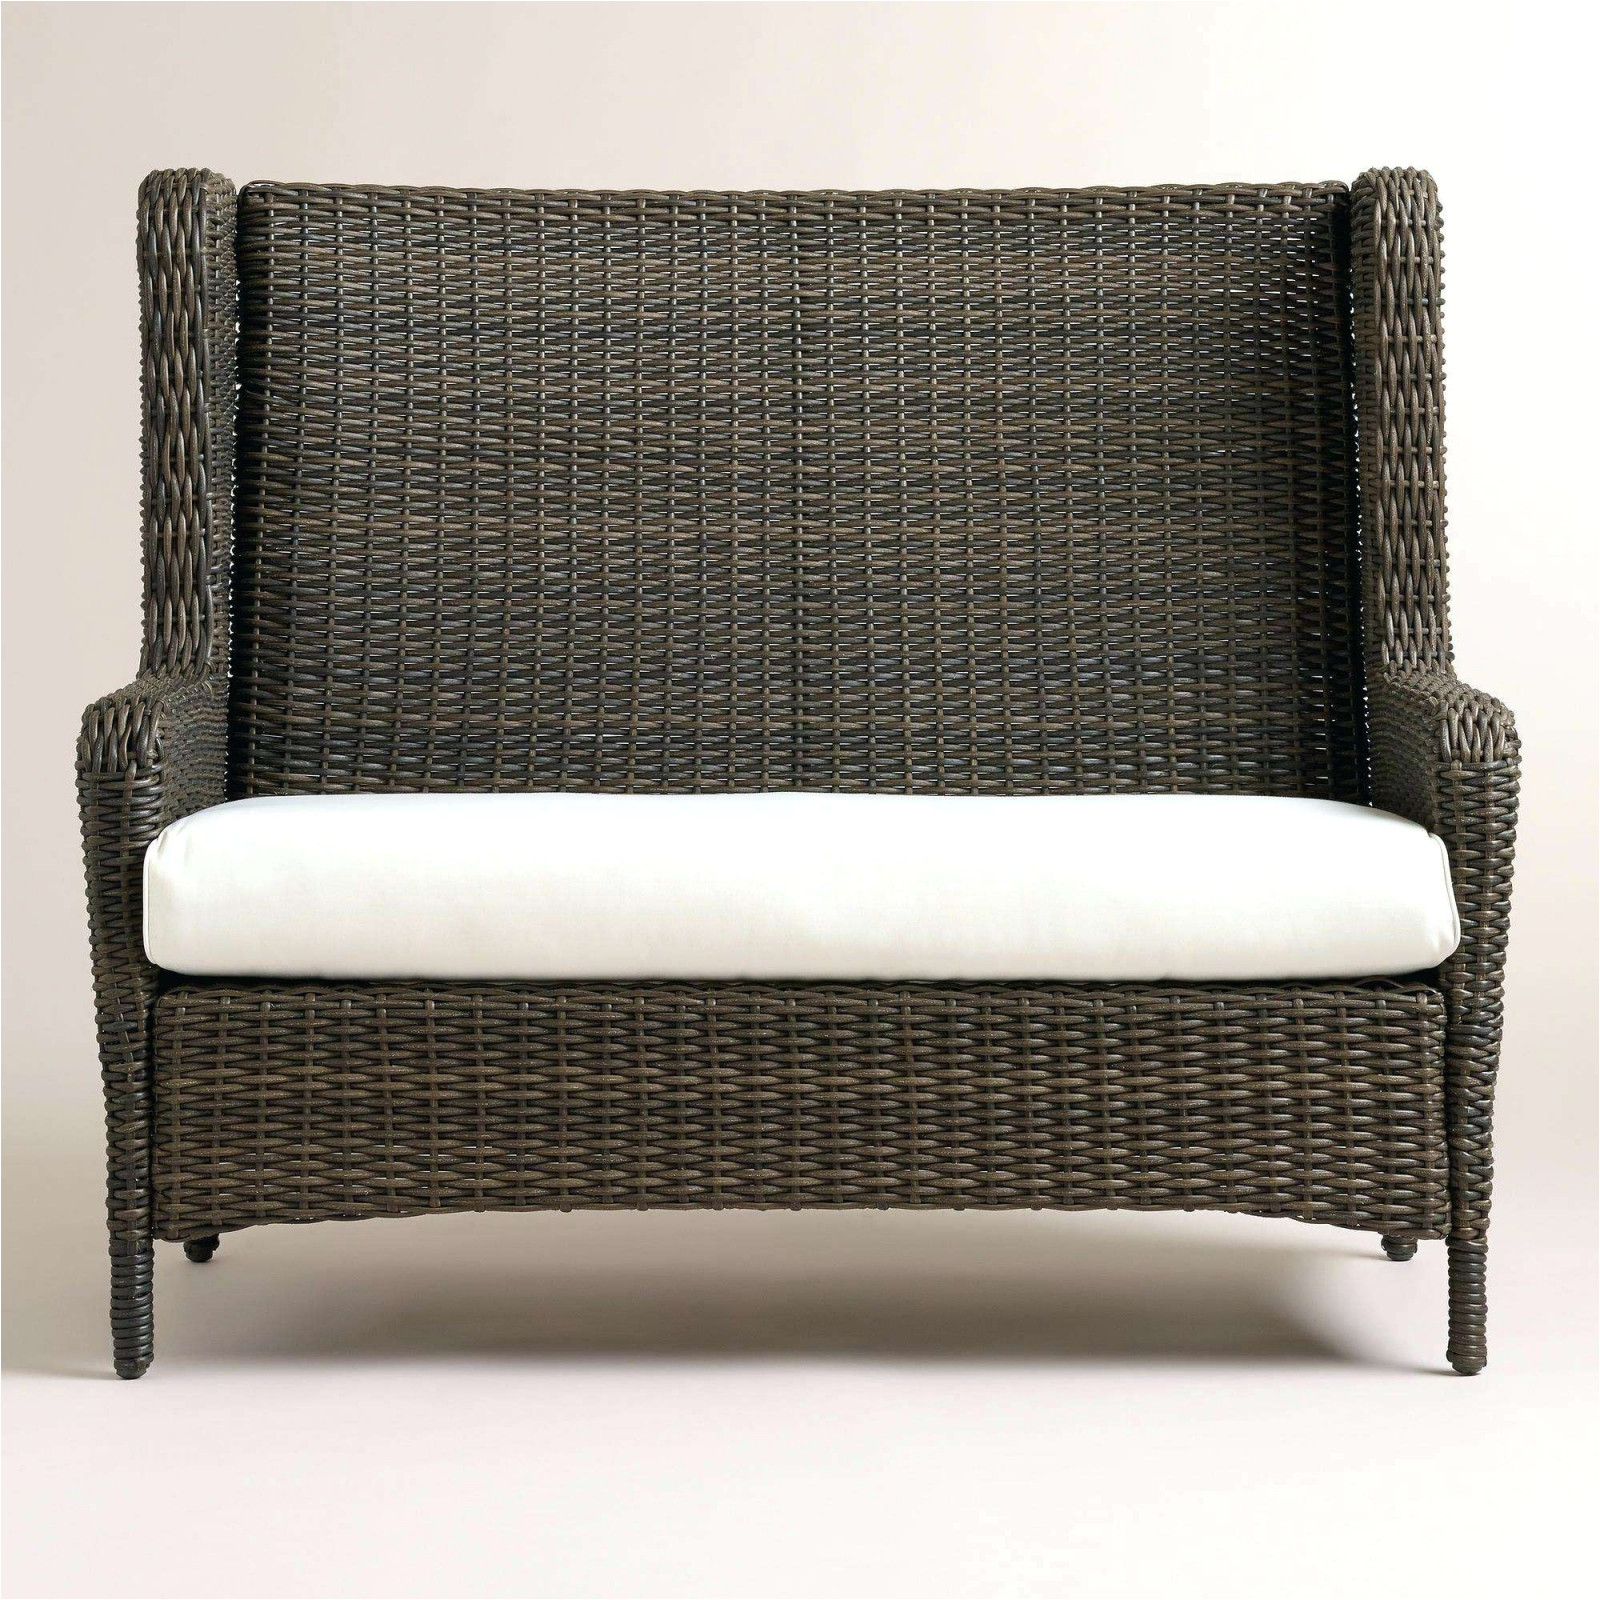 image of wicker outdoor sofa 0d patio chairs sale replacement cushions design